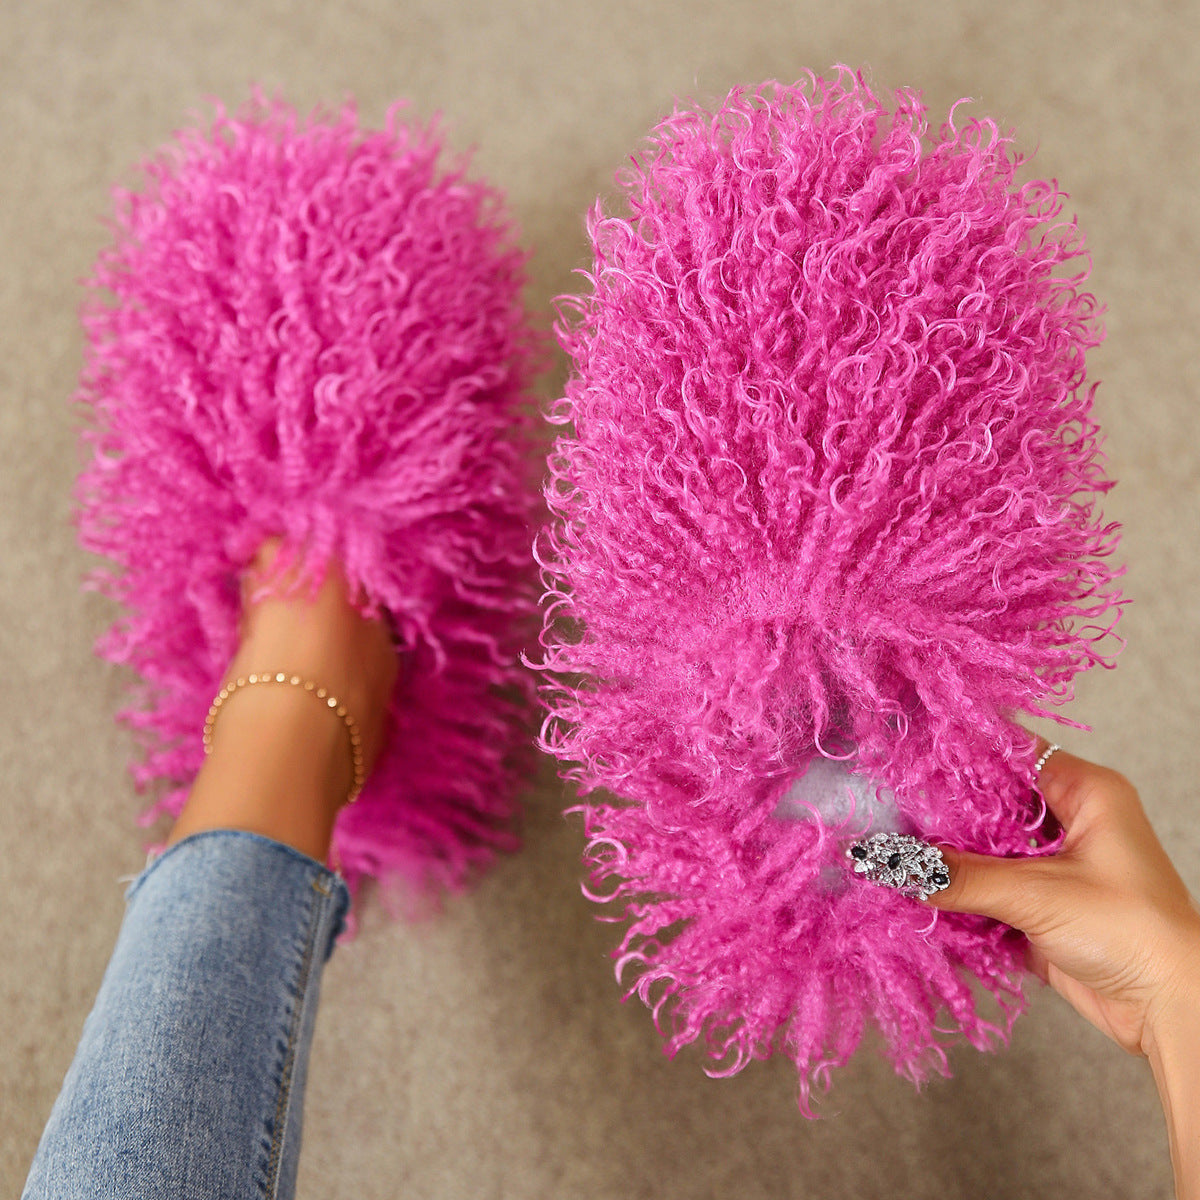 Warm Women's Home Cotton Slippers